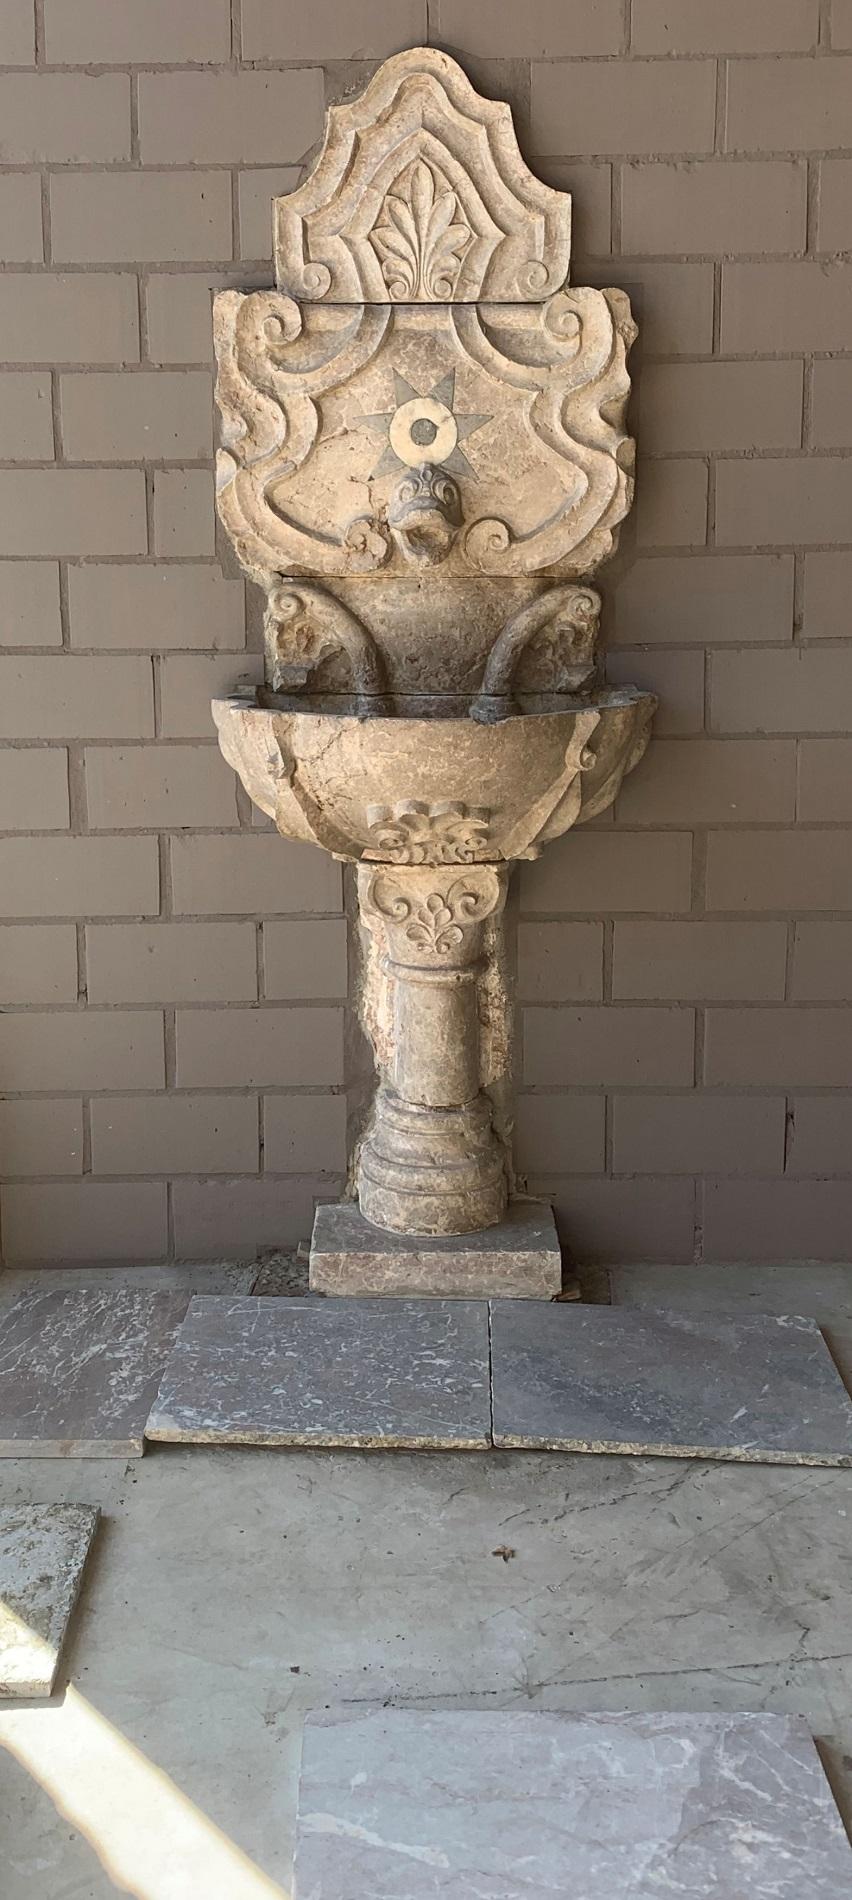 A large 19th century Portuguese wall fountain. Finely sculted in Verona marble with a moulded star inlayed plint above the lobbed basin resting on a baluster plint. The dolphin snout beautifully sculted out of the same black marble as the intarsia